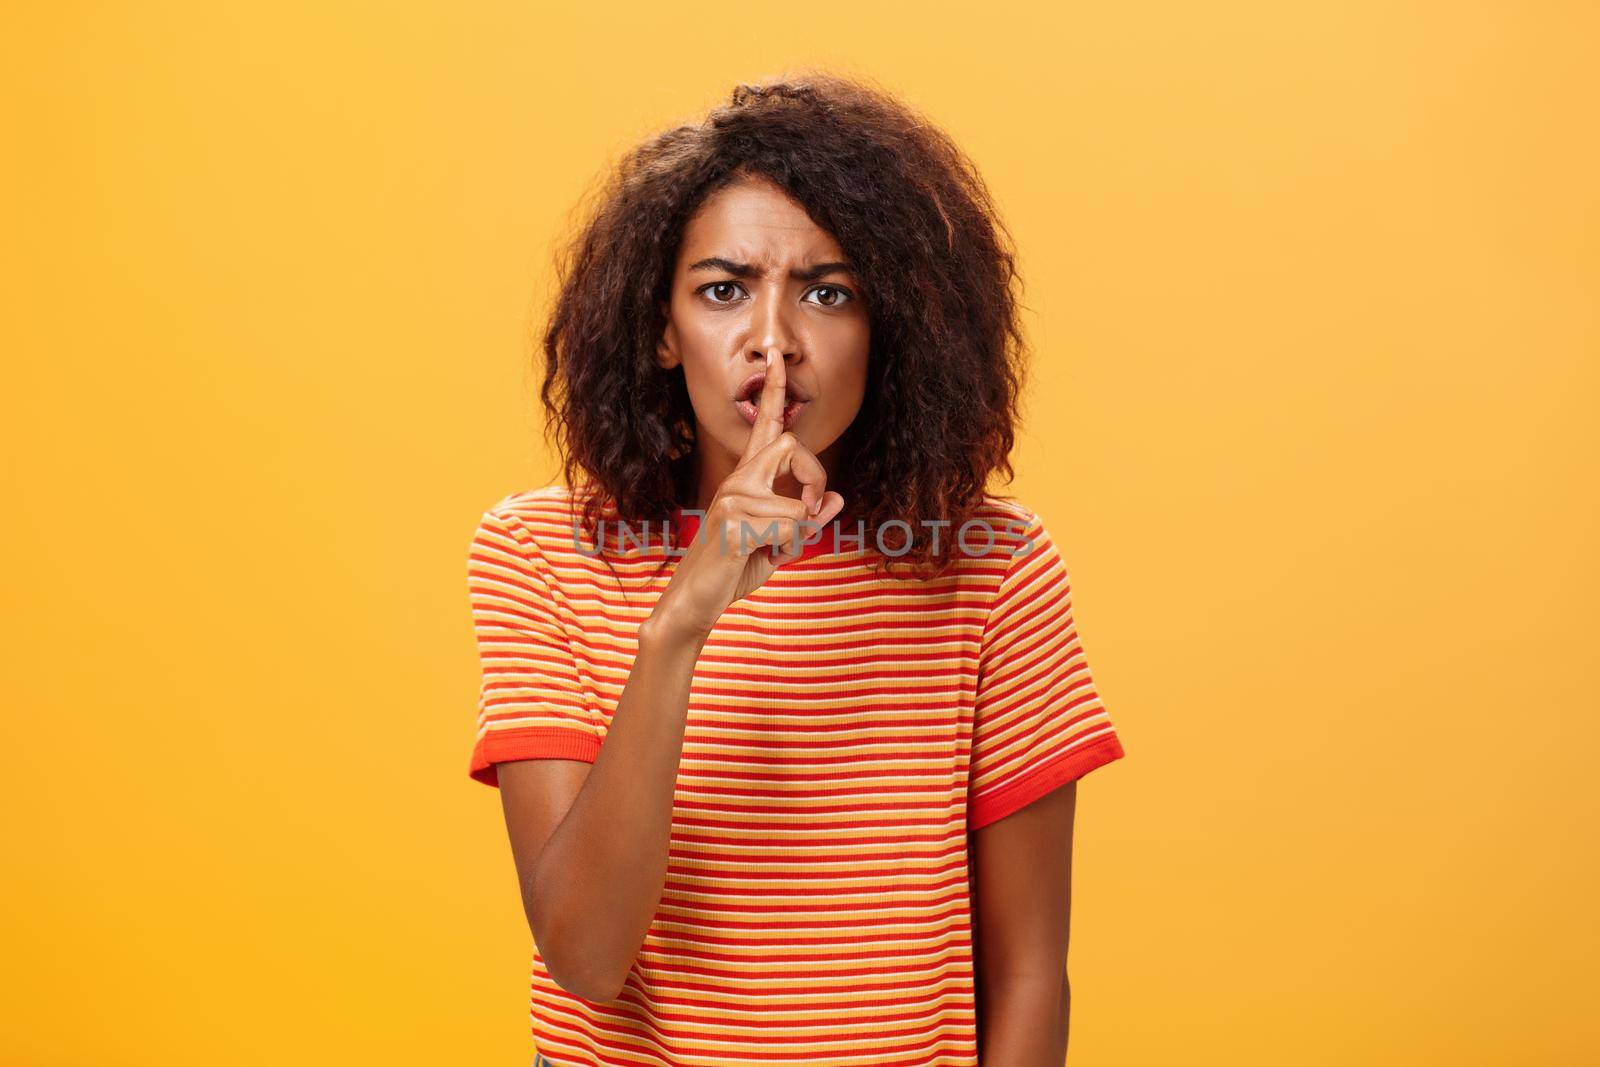 Shh do not disturb. Portrait of serious-looking bossy and displeased cute african american girl with afro hairstyle frowning shushing at camera with index finger over mouth forbidding speak loud.